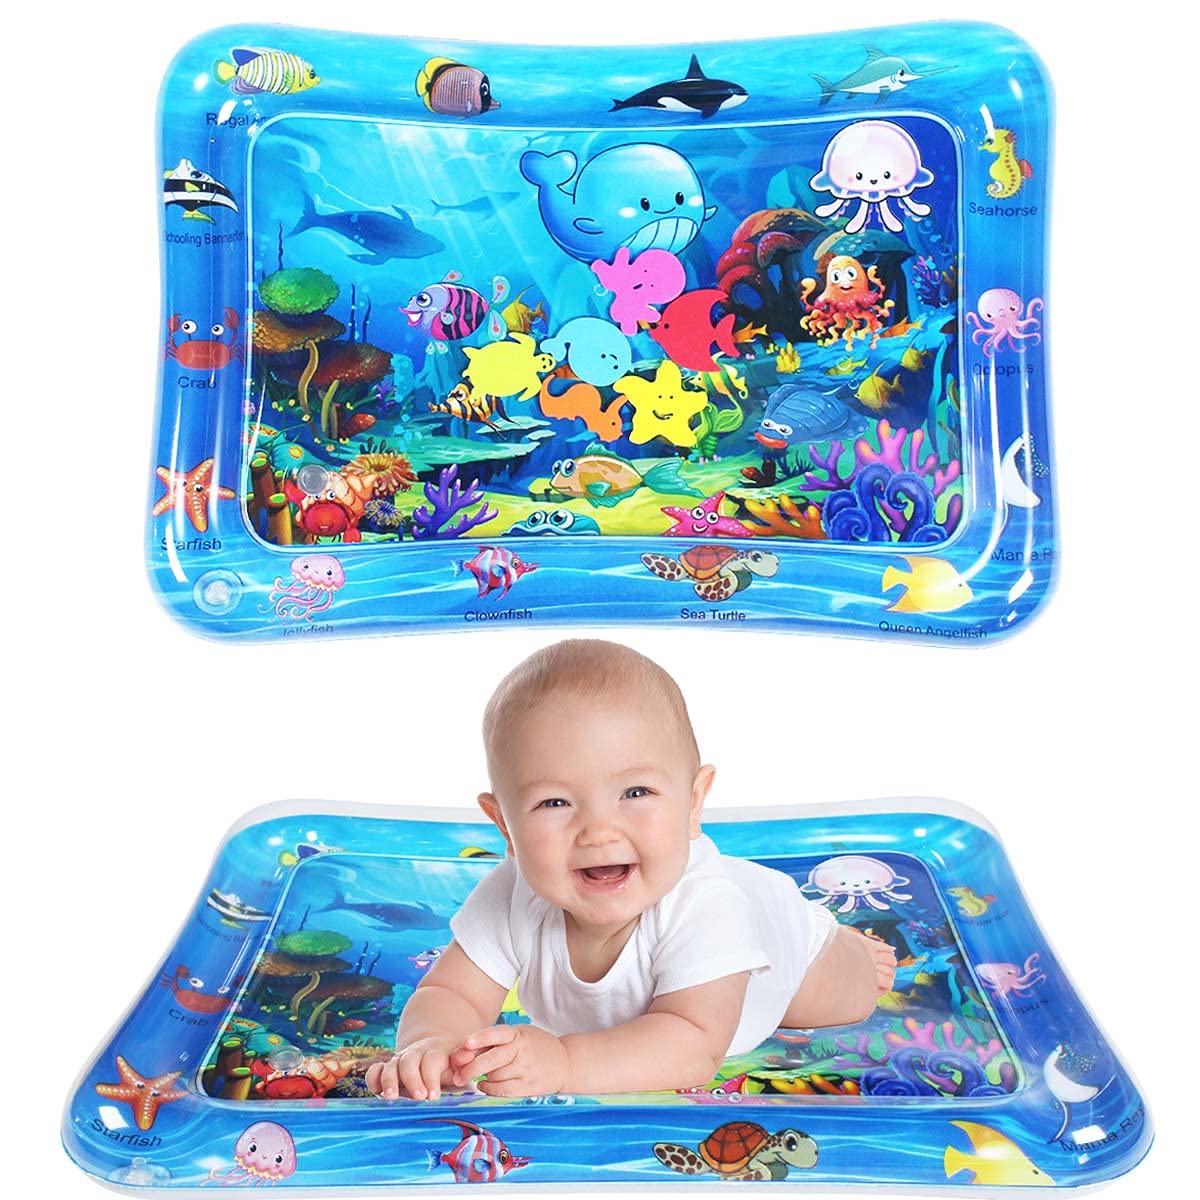 Inflatable Water Play Mat+Inflator Set Infant Fun Tummy Time Kids Play Activity 